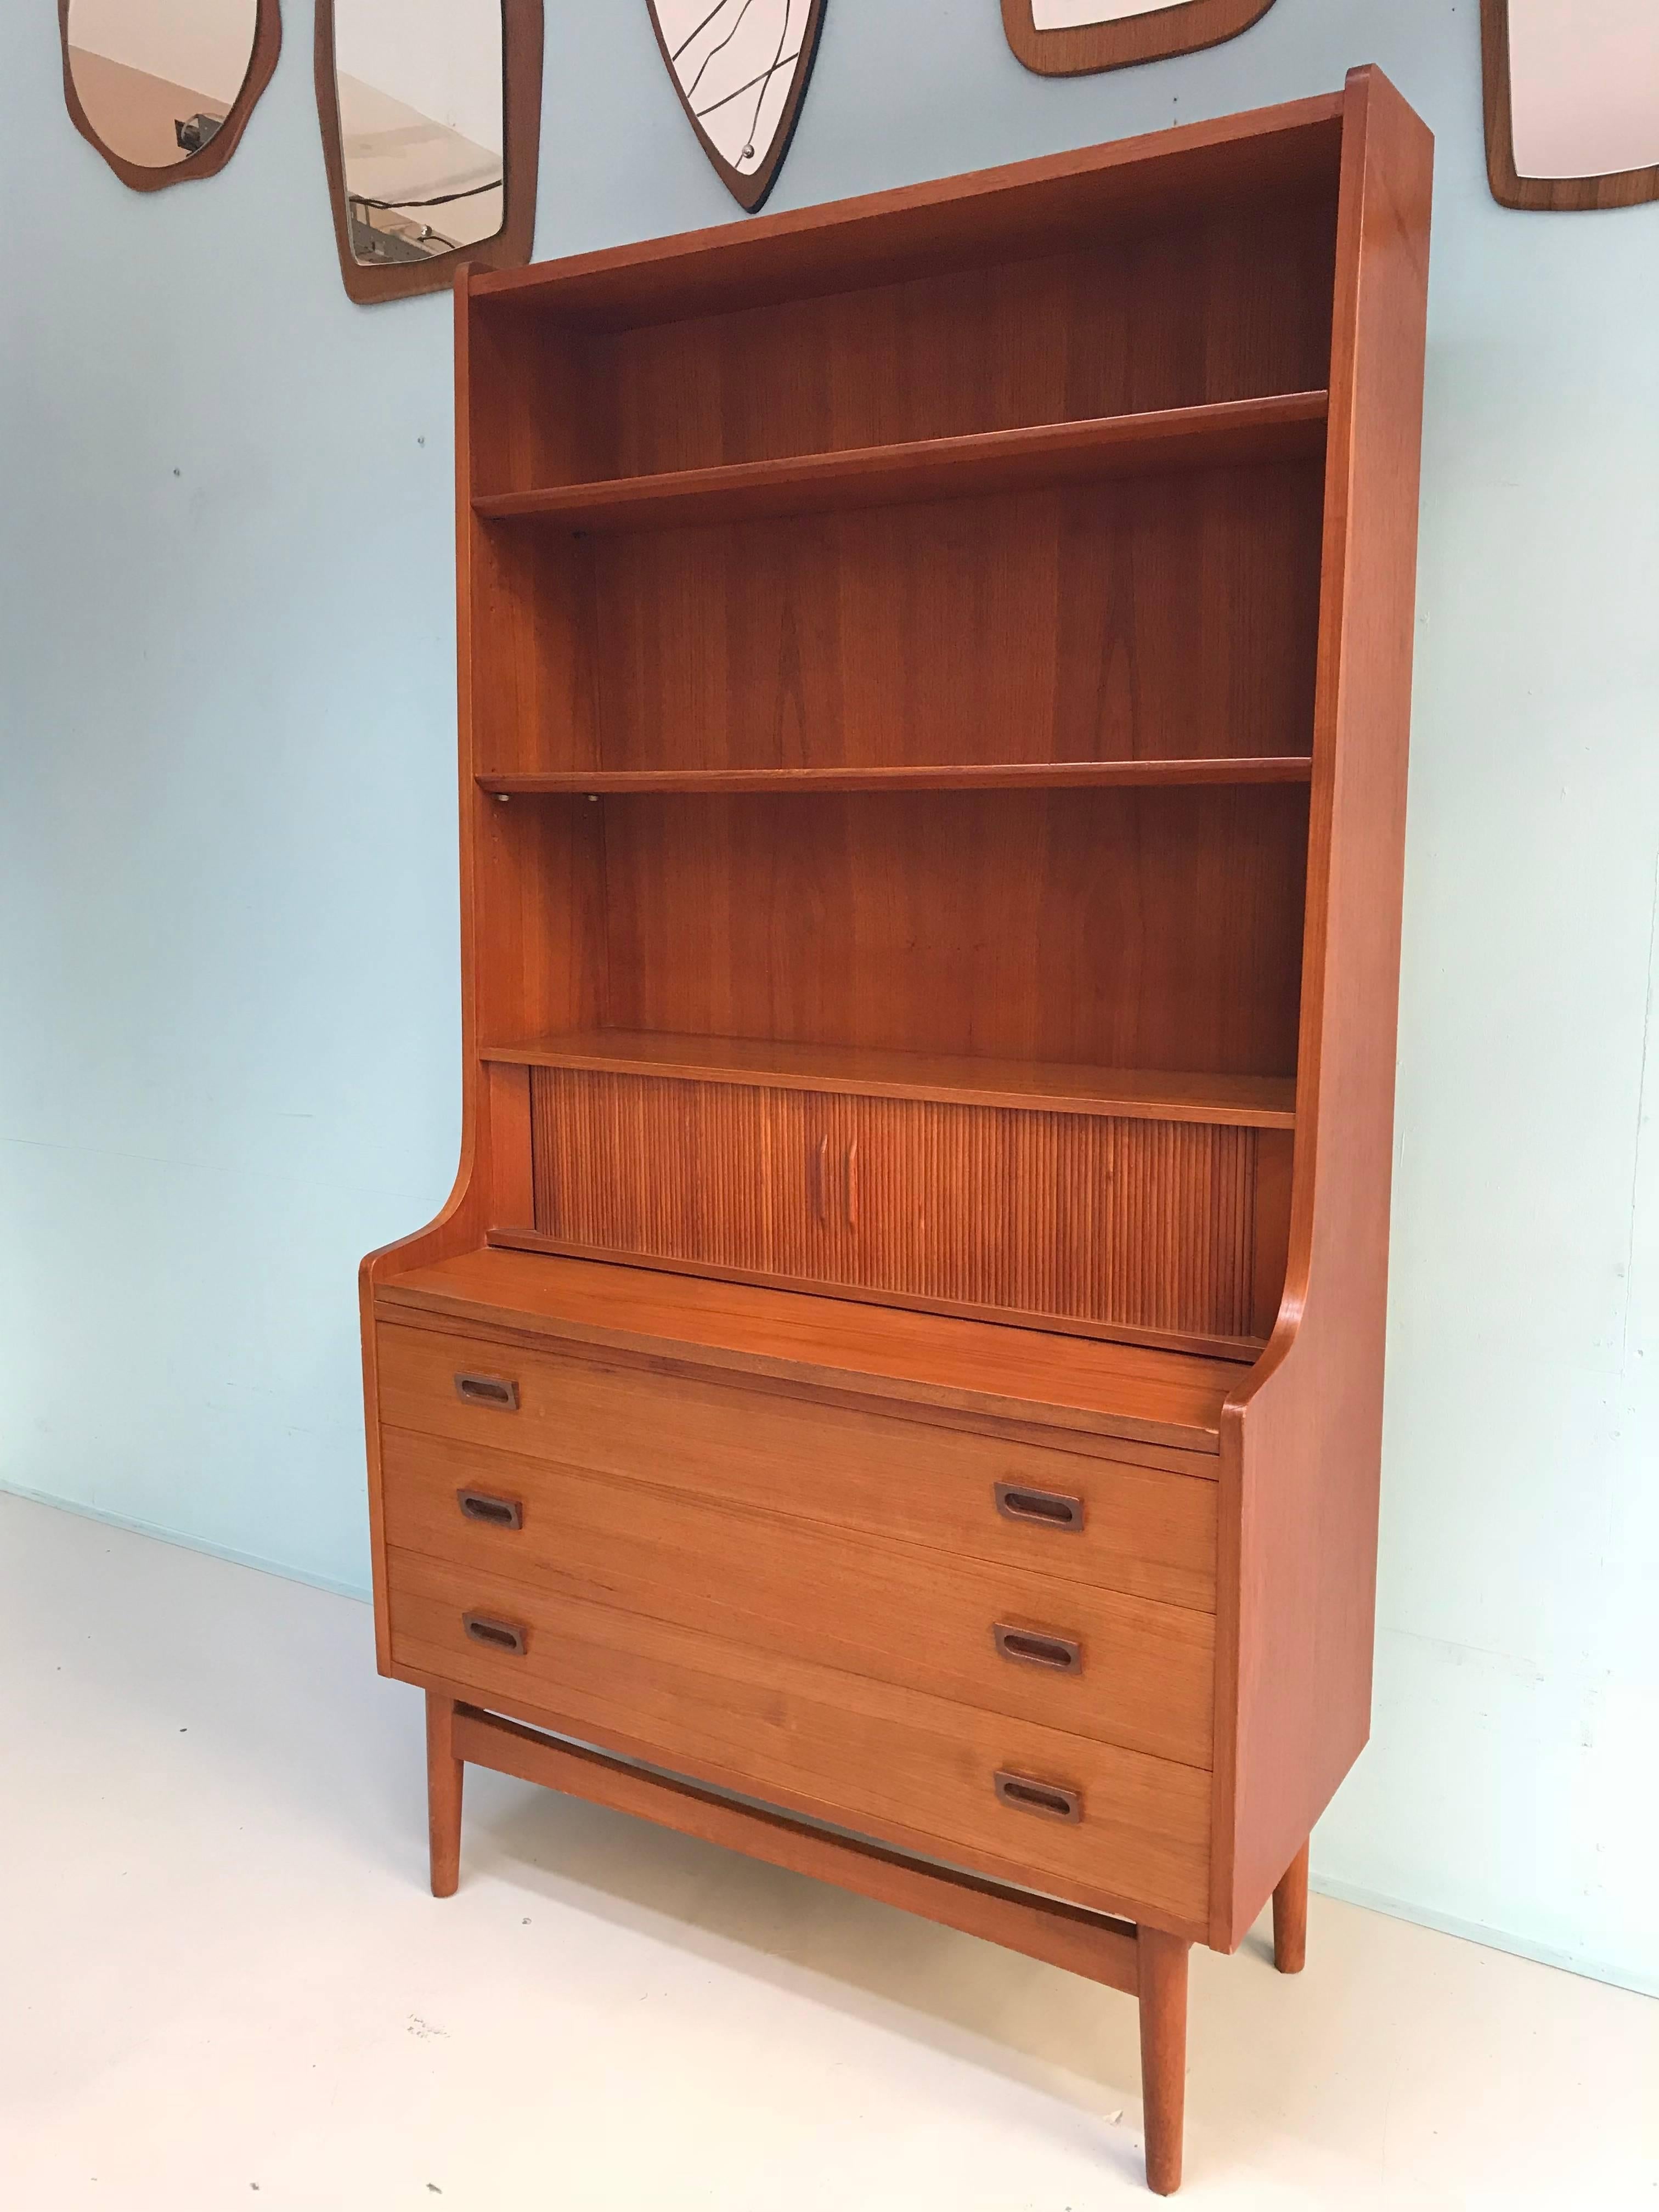 Danish teak midcentury secretaire by Johannes Sorth for BM Mobler with pull-out writing surface, letter storage and small drawers behind tambour sliding doors three height-adjustable shelves and a lower cabinet with three drawers.
Condition: